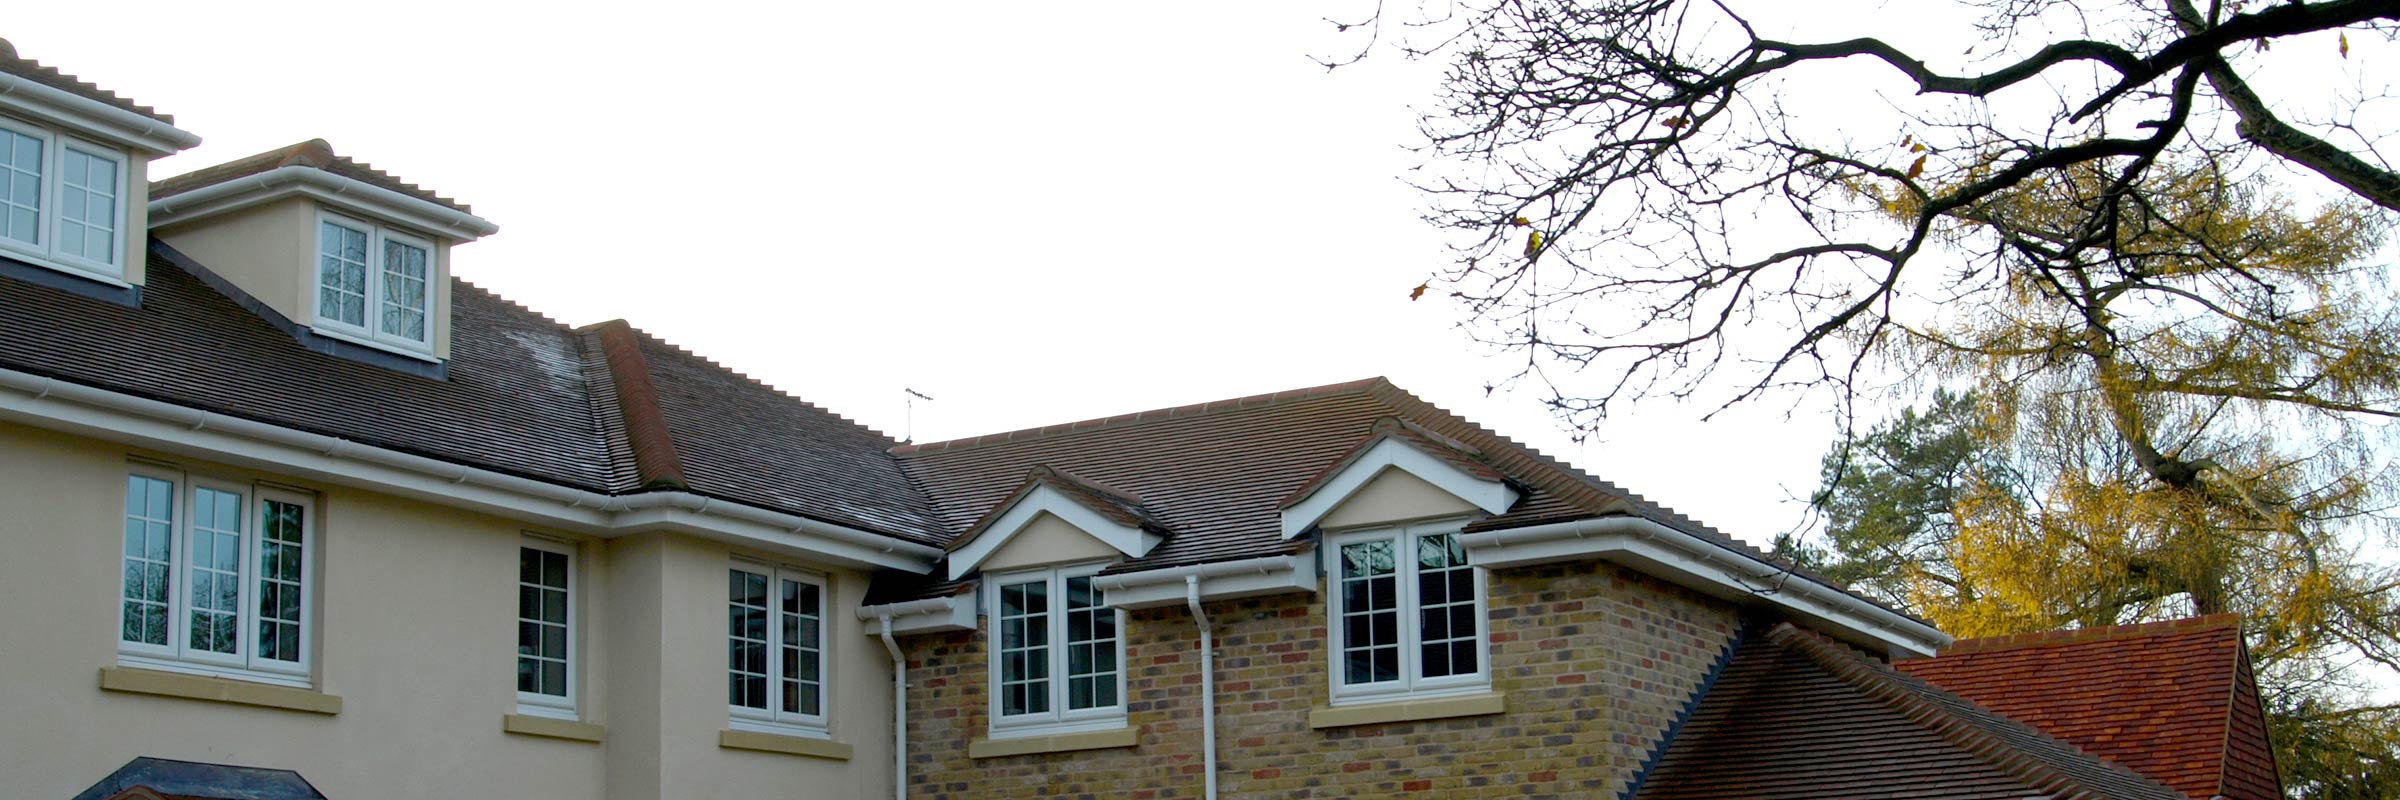 Paul Nunn Roofing Ltd-Roofing Contractor-Suffolk-Cambridge-Ipswich-National Federation of Roofing Contractors